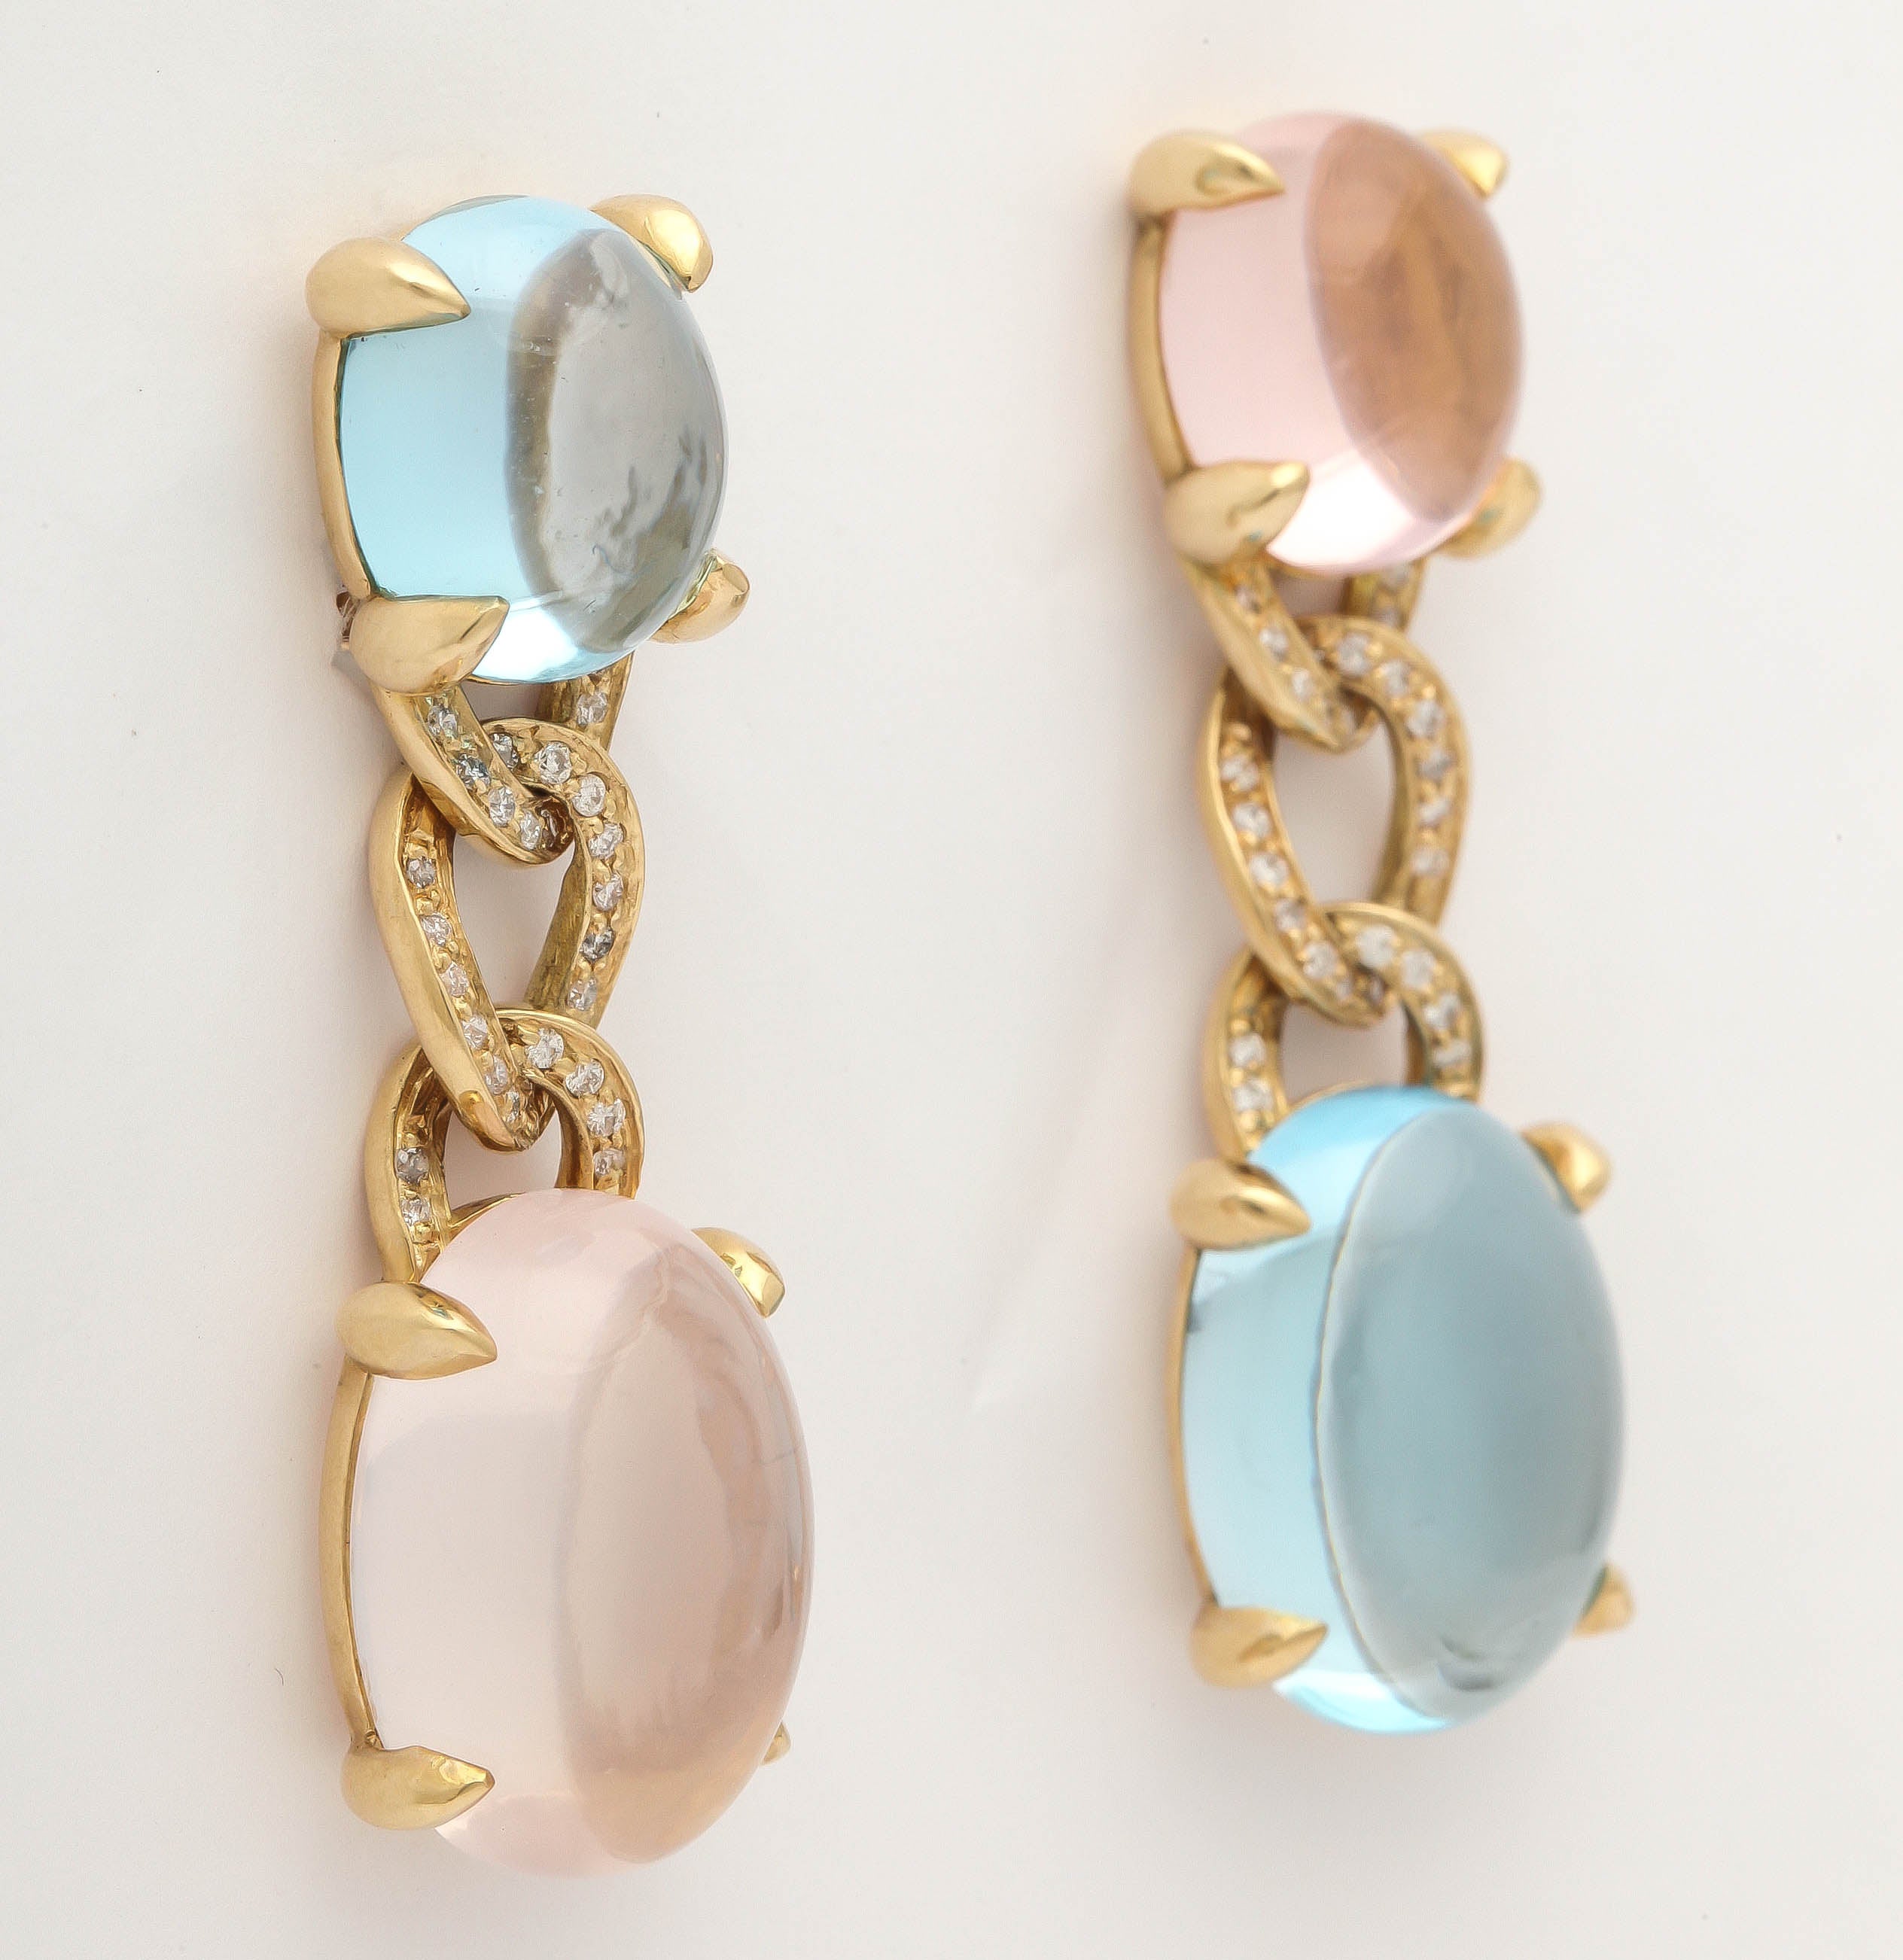 18KT yellow gold earrings with blue topaz, rose quartz and white diamonds.